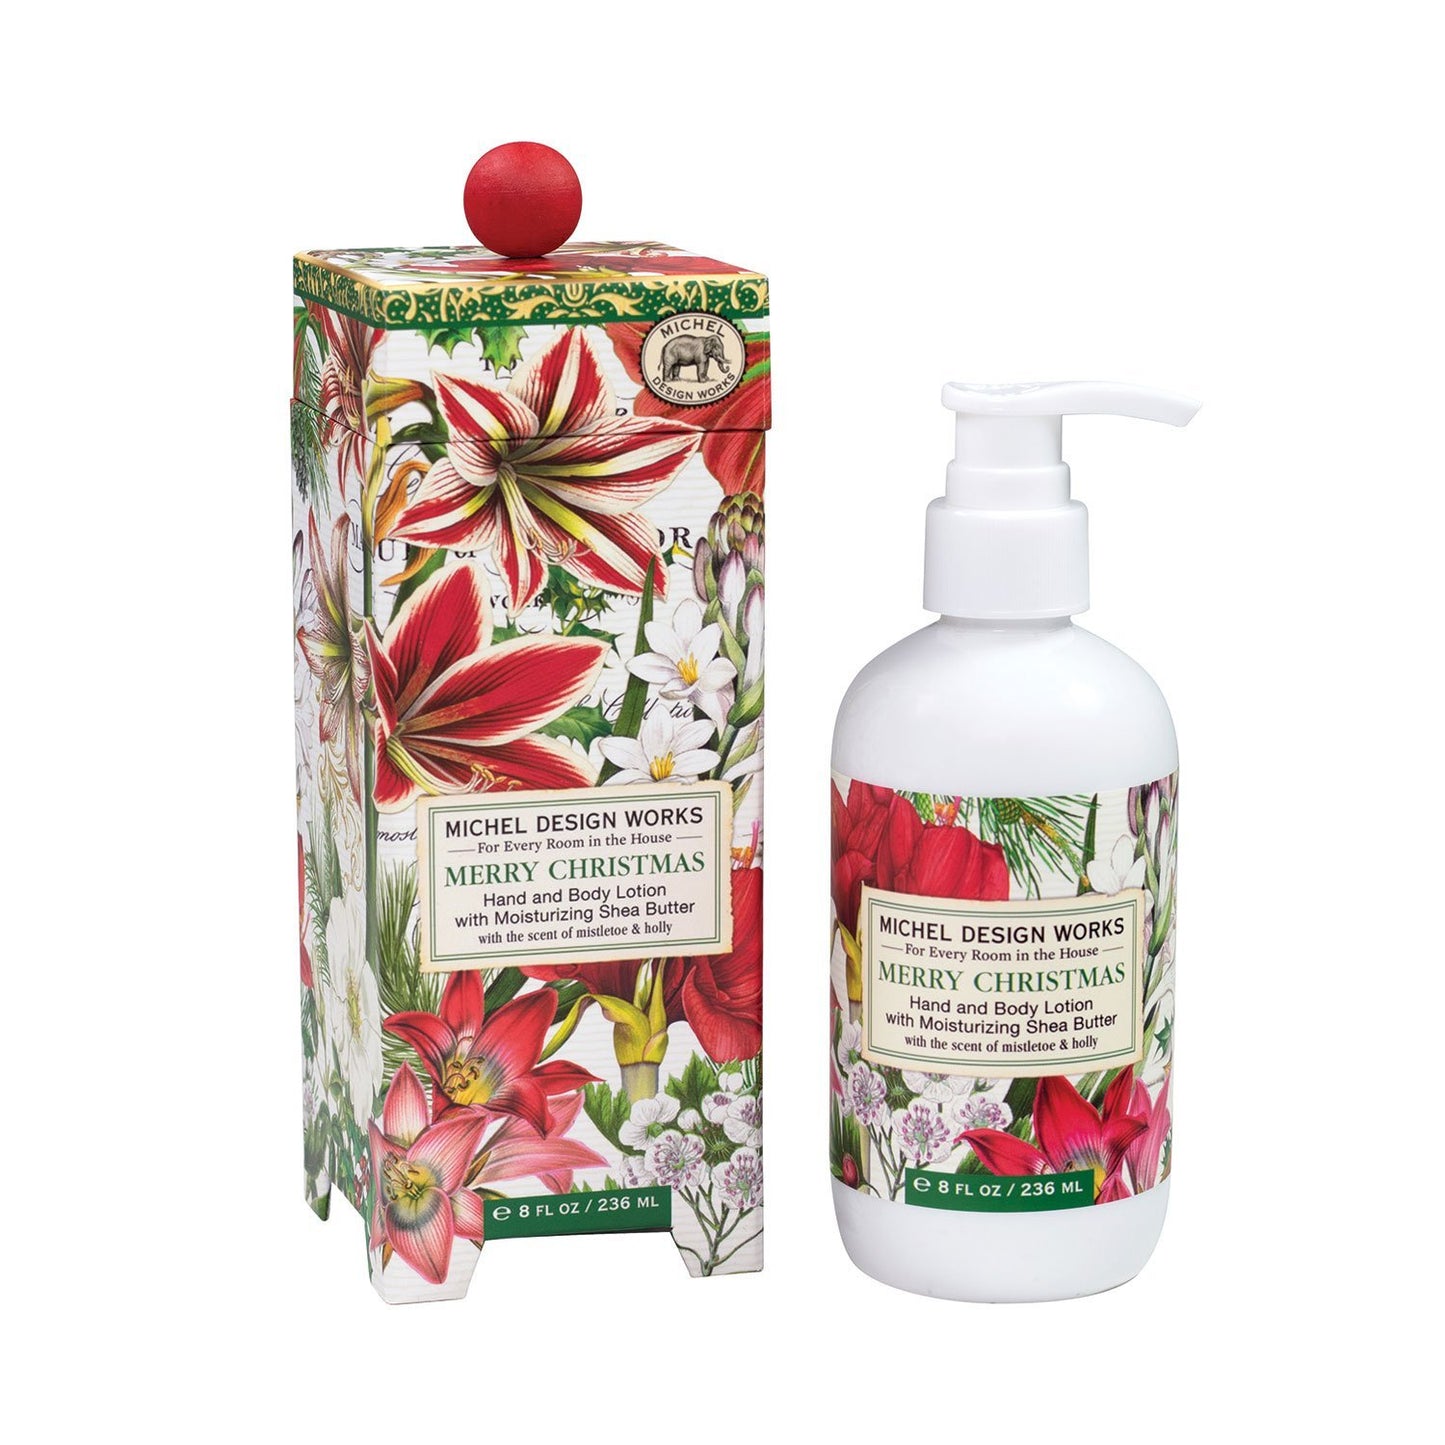 Merry Christmas Lotion Festive Hand and Body Elixir with Holly and Winter Florals Fragrance